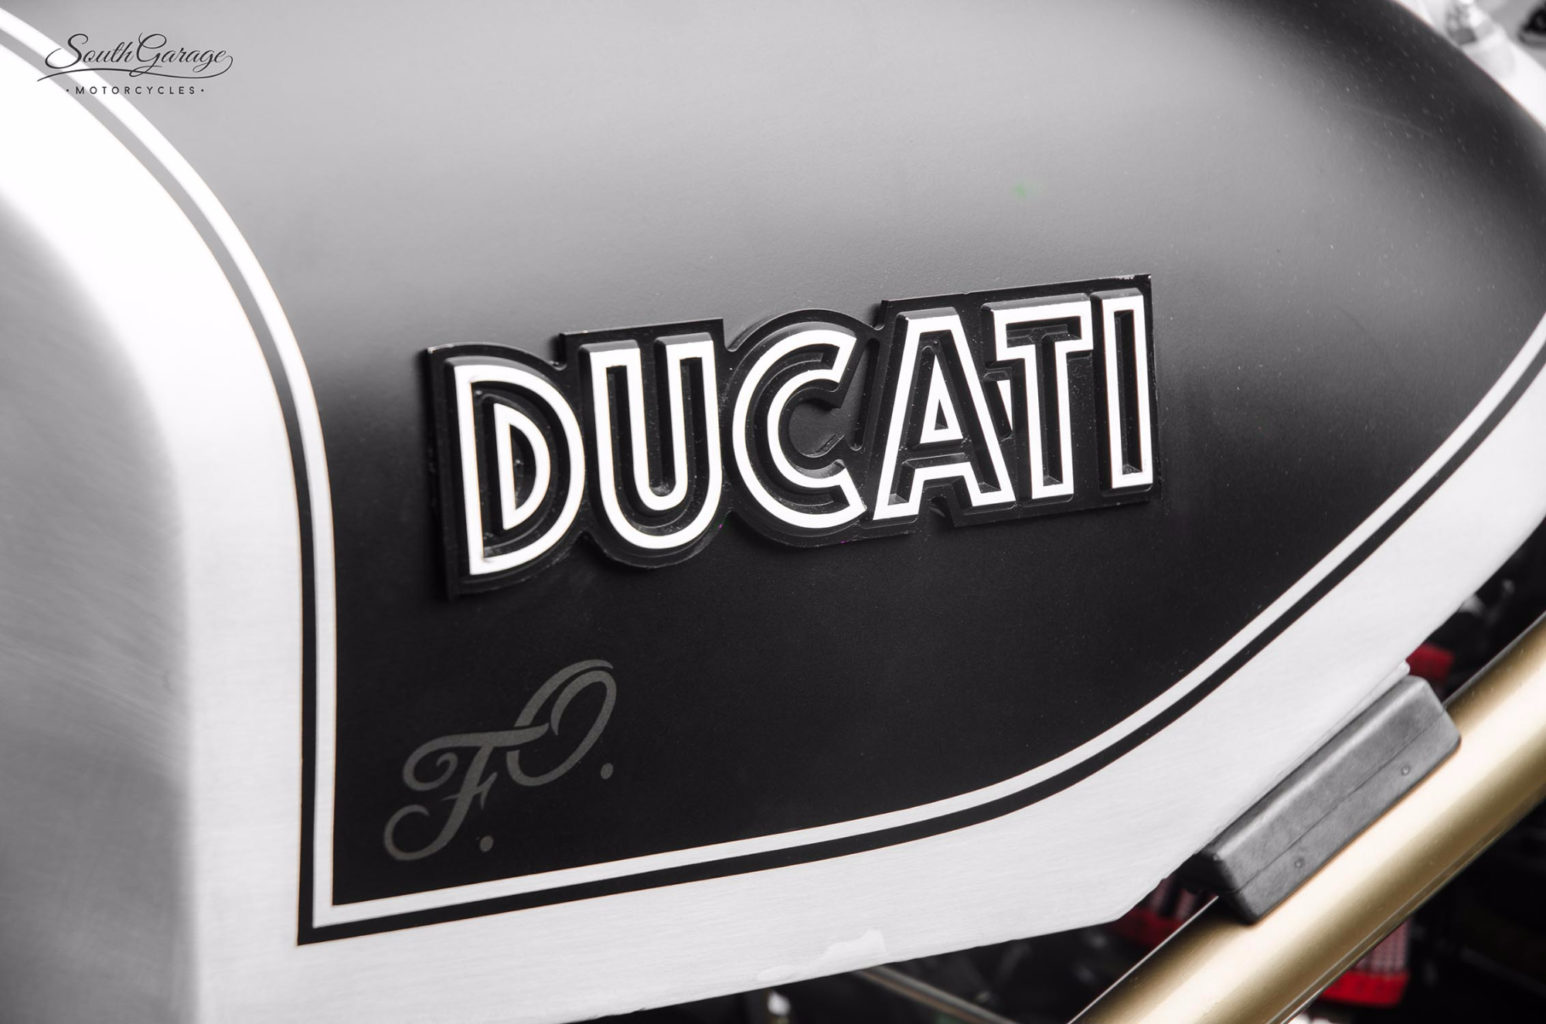 Ducati Monster S4R "Black Pearl" by South Garage